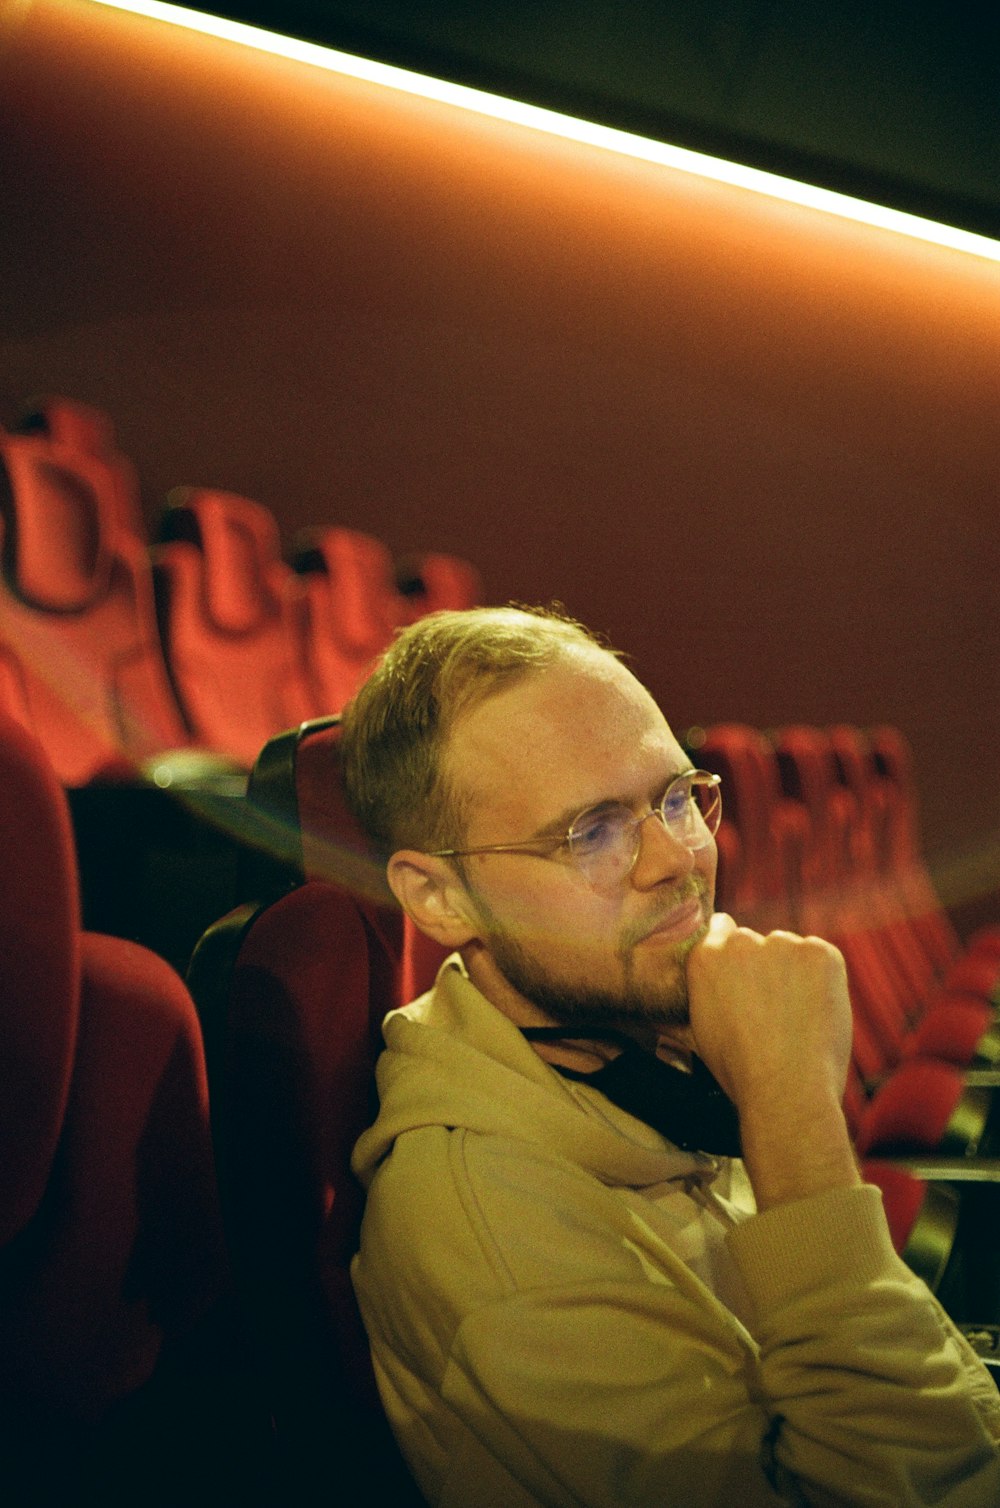 a man with glasses sitting in a red chair